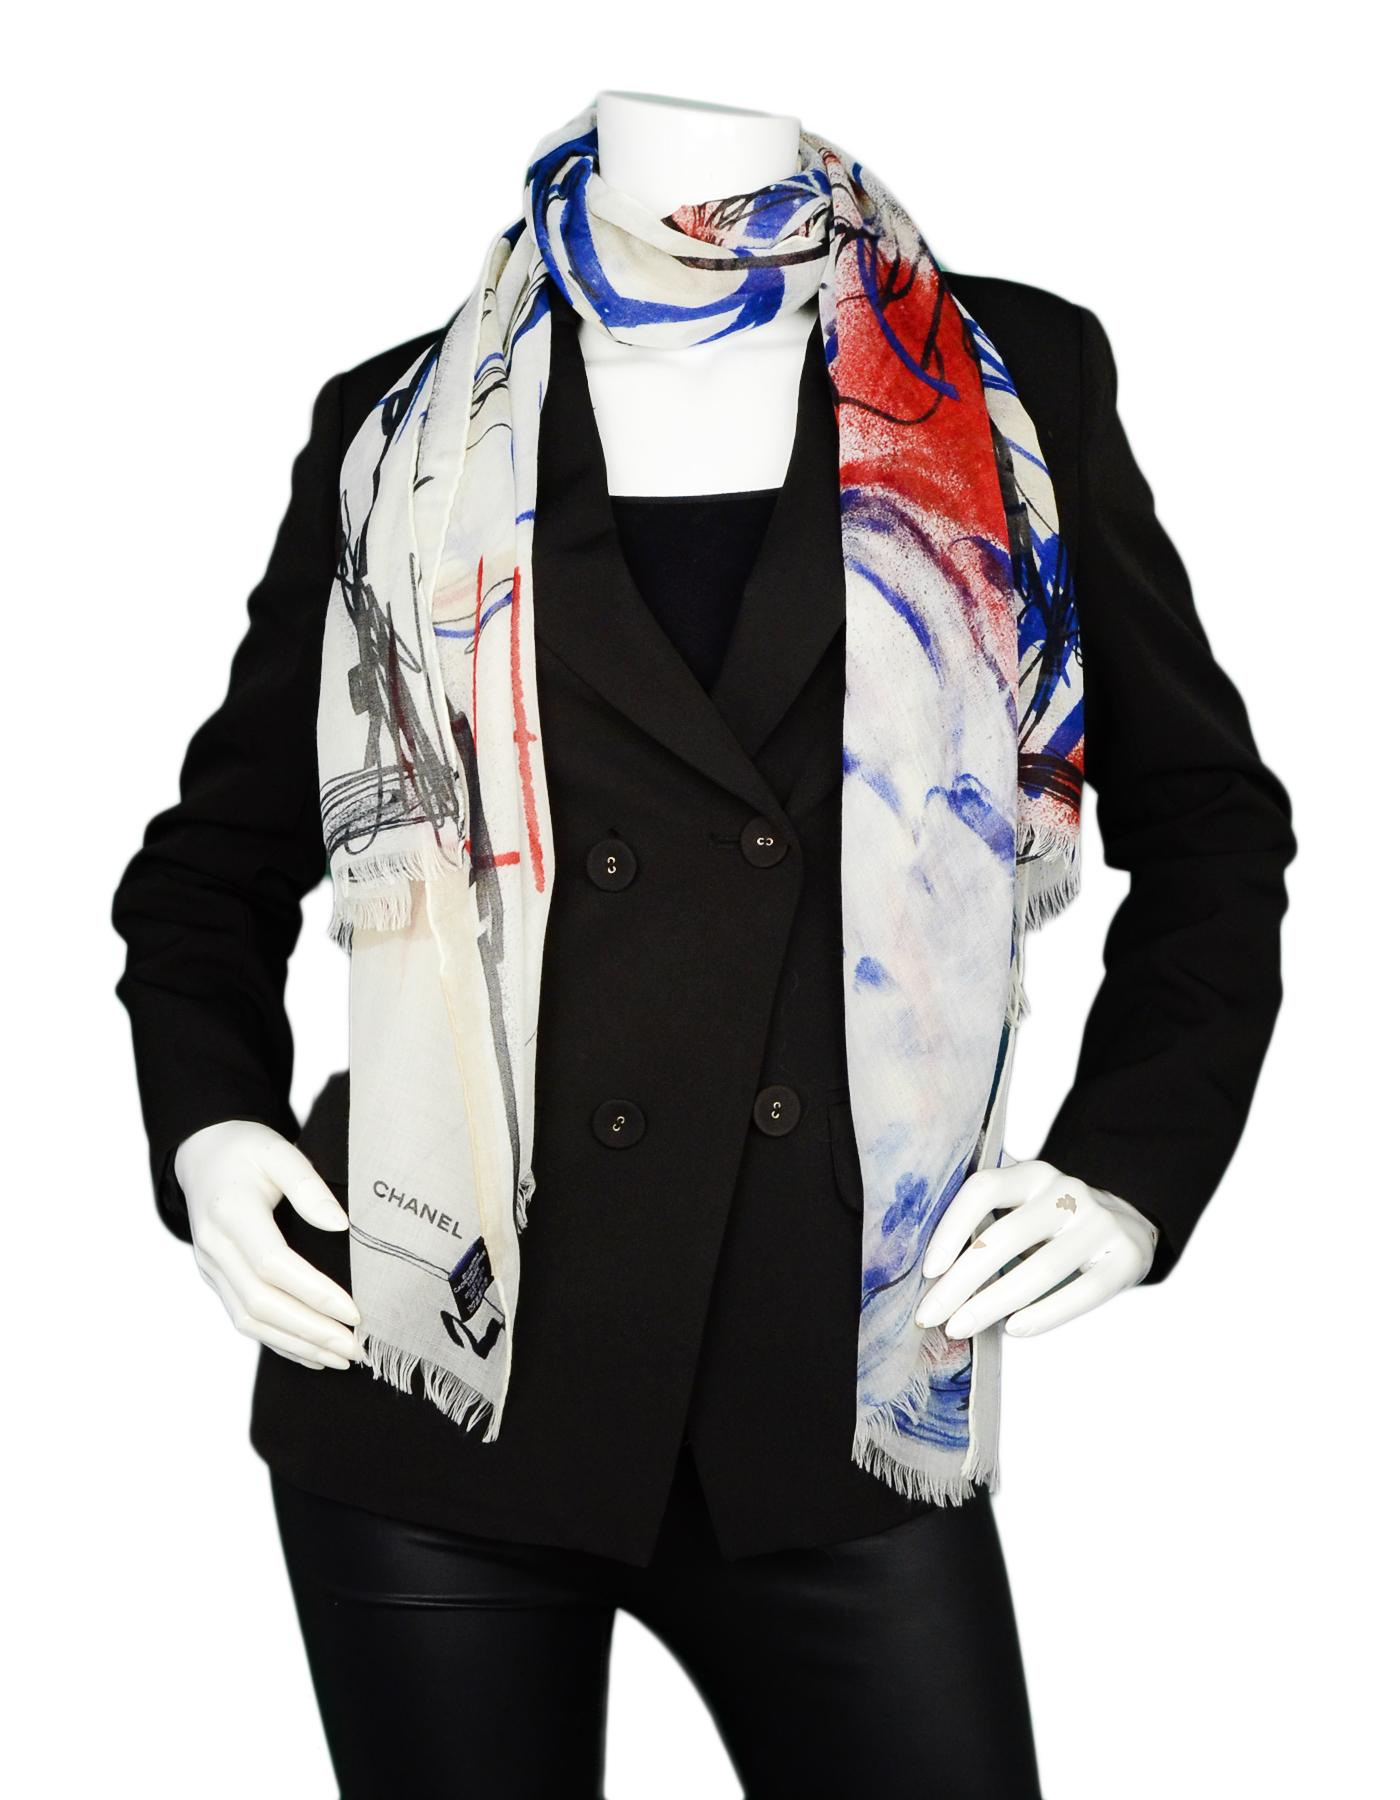 Chanel Ivory/Blue Cashmere/Silk Graffiti Print Stole/Silk

Made In: Italy
Year of Production: 2015
Color: Ivory/blue
Materials: 80% cashmere, 20% silk
Overall Condition: 
Estimated Retail: $825 + tax
Includes: Chanel tag

Measurements: 
25